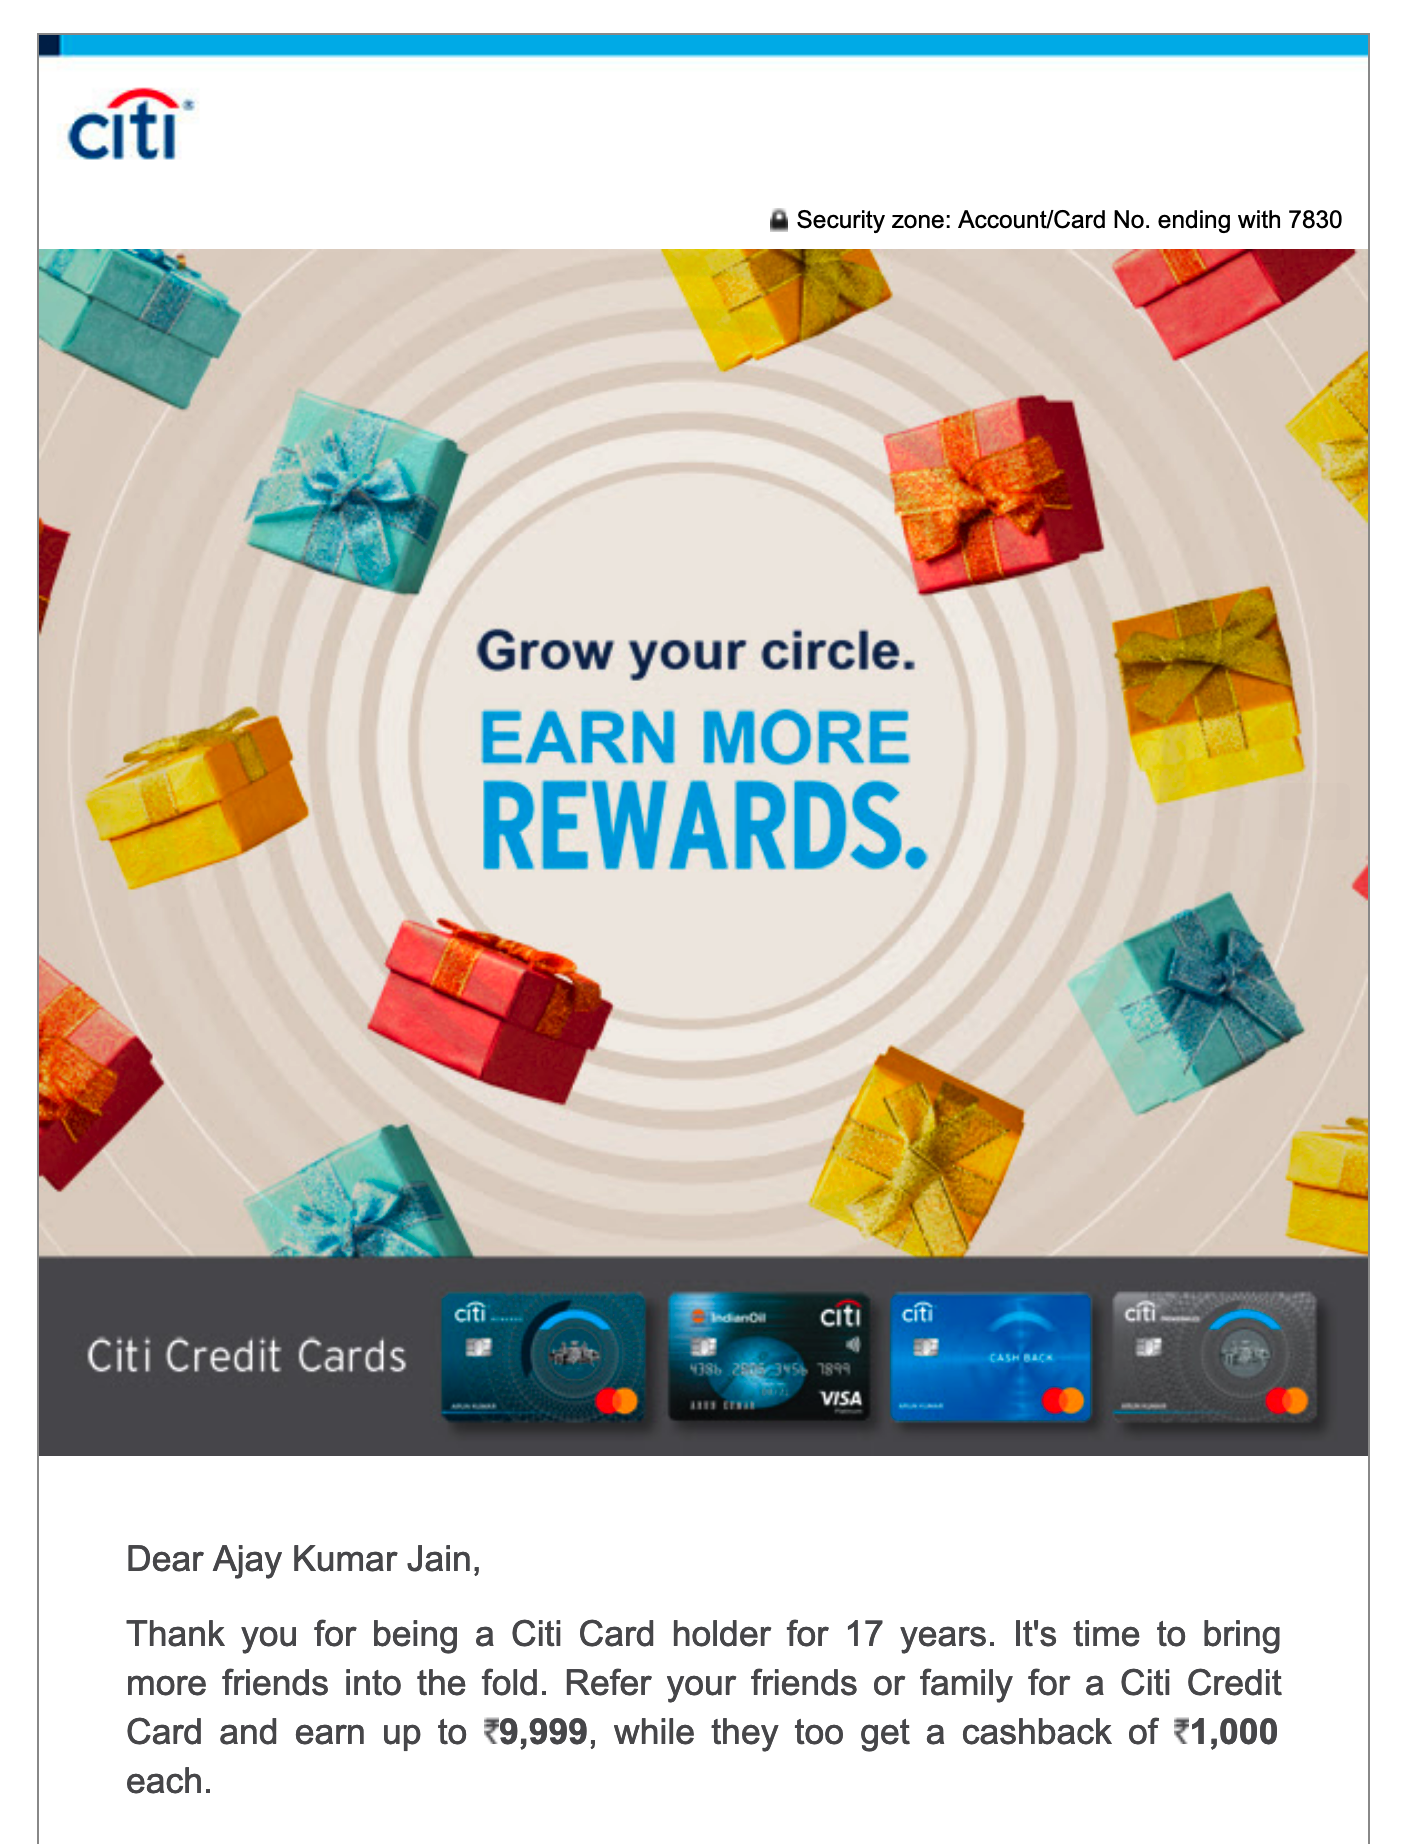 17 years of using Citibank Credit Card